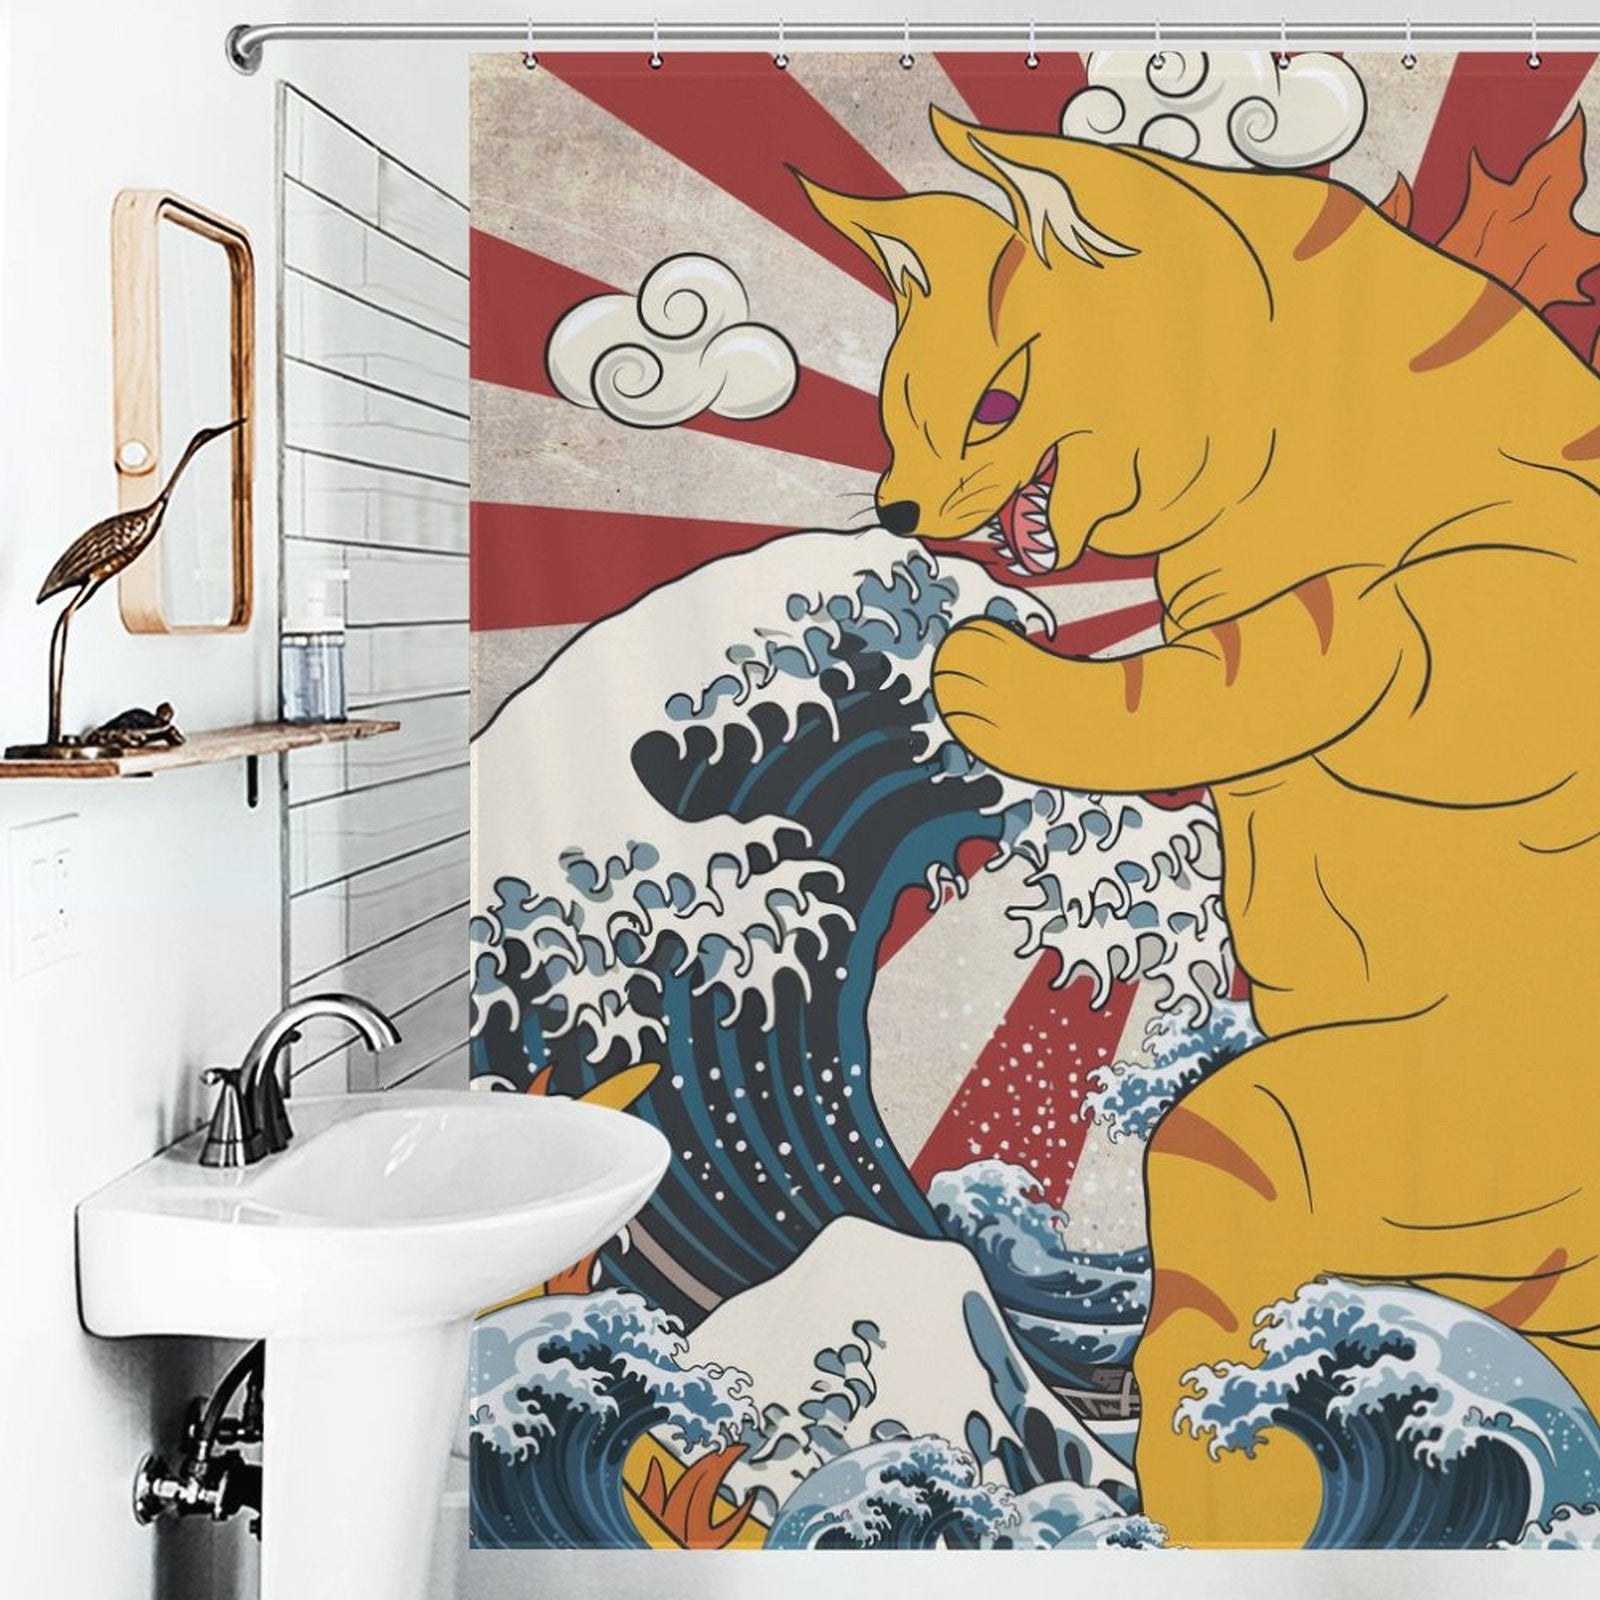 Shower curtain with a design featuring a large yellow cat wielding its claws over a stylized ocean wave, reminiscent of Japanese art. The background includes red and white rays and clouds. Perfect for cat bathroom decor, this **Funny Wave Monster Cat Shower Curtain-Cottoncat** by **Cotton Cat** is truly unique.